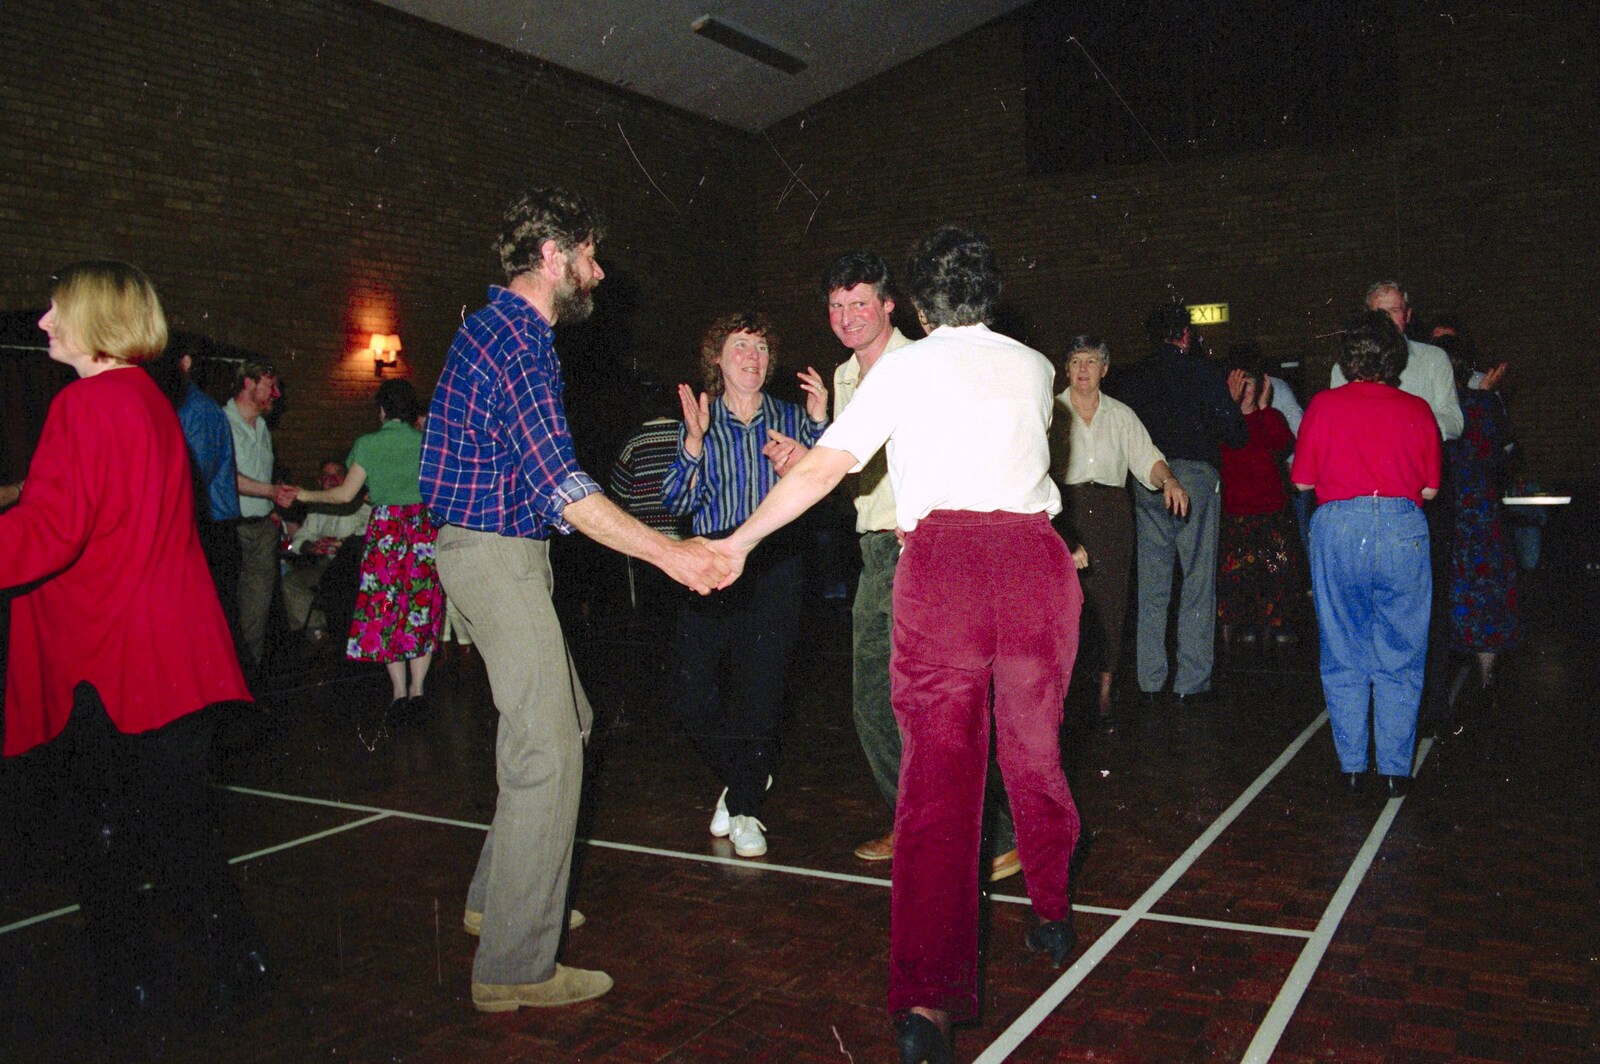 Geoff, Brenda, Mike and Sue dance around from A Ceilidh and a Walk Across the Common, Stuston - 26th February 1992